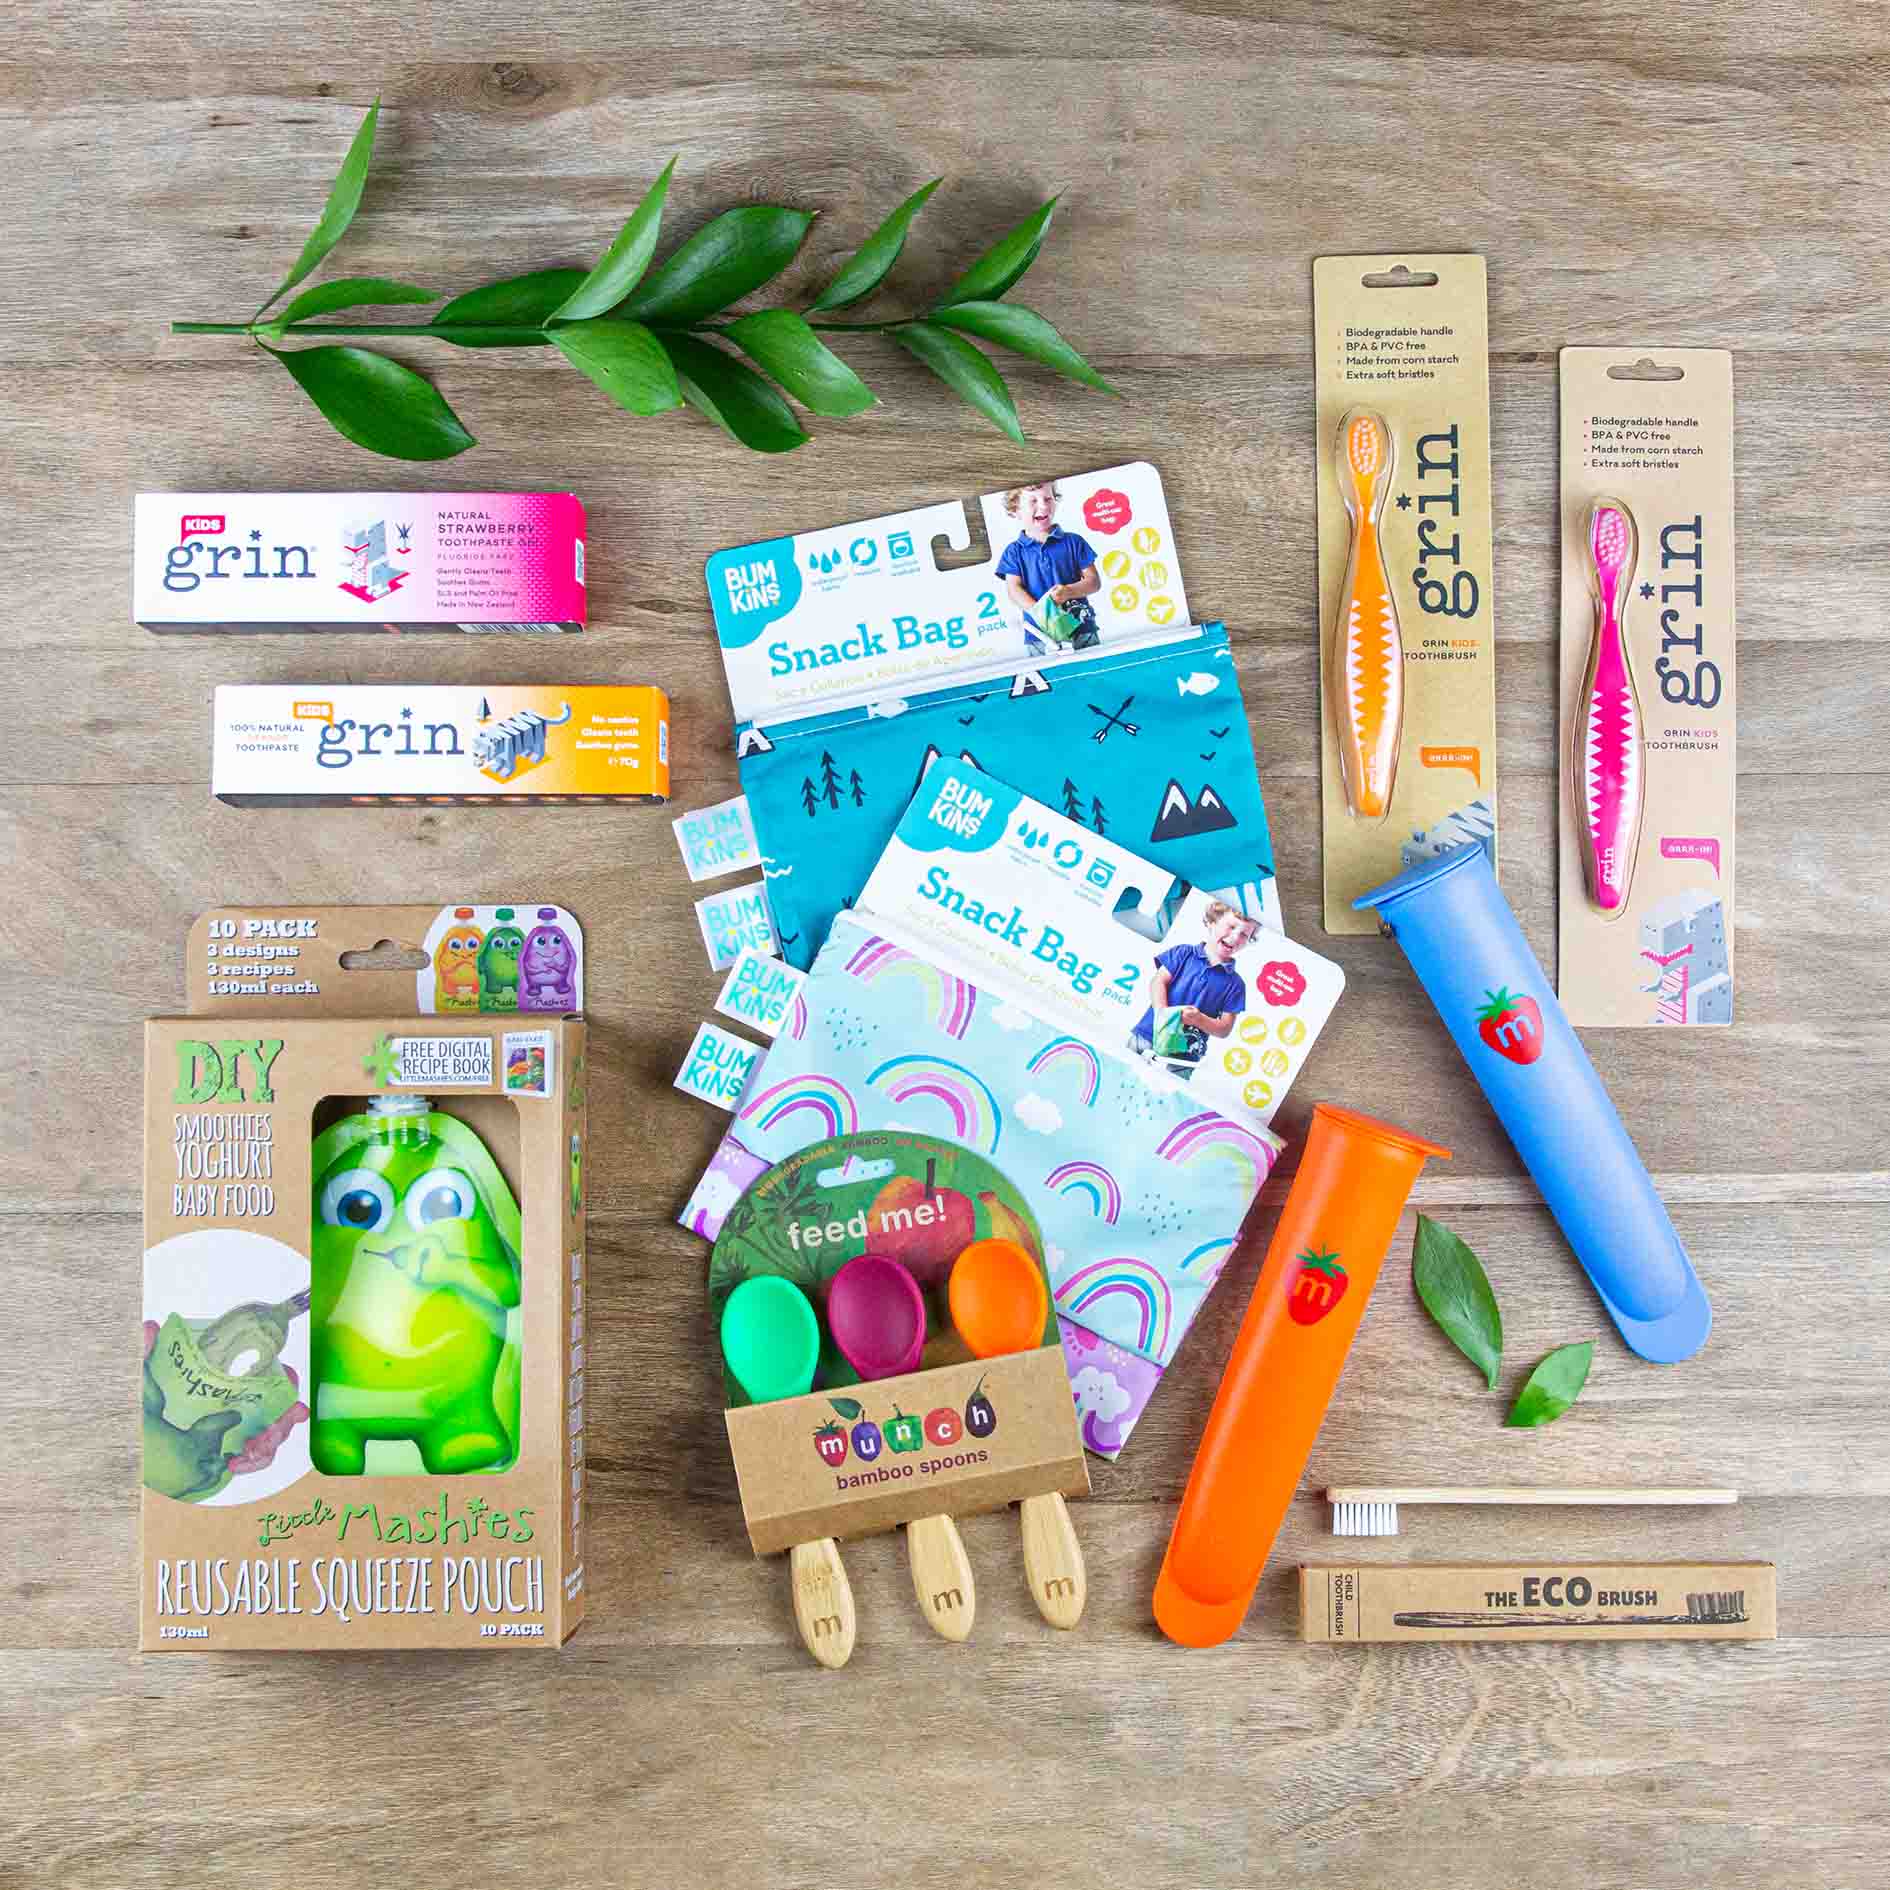 A range of eco products for kids and babies, including ice pop pouches, reusable food pouches, bamboo spoons, snack bags and bamboo toothbrushes and toothpastes.